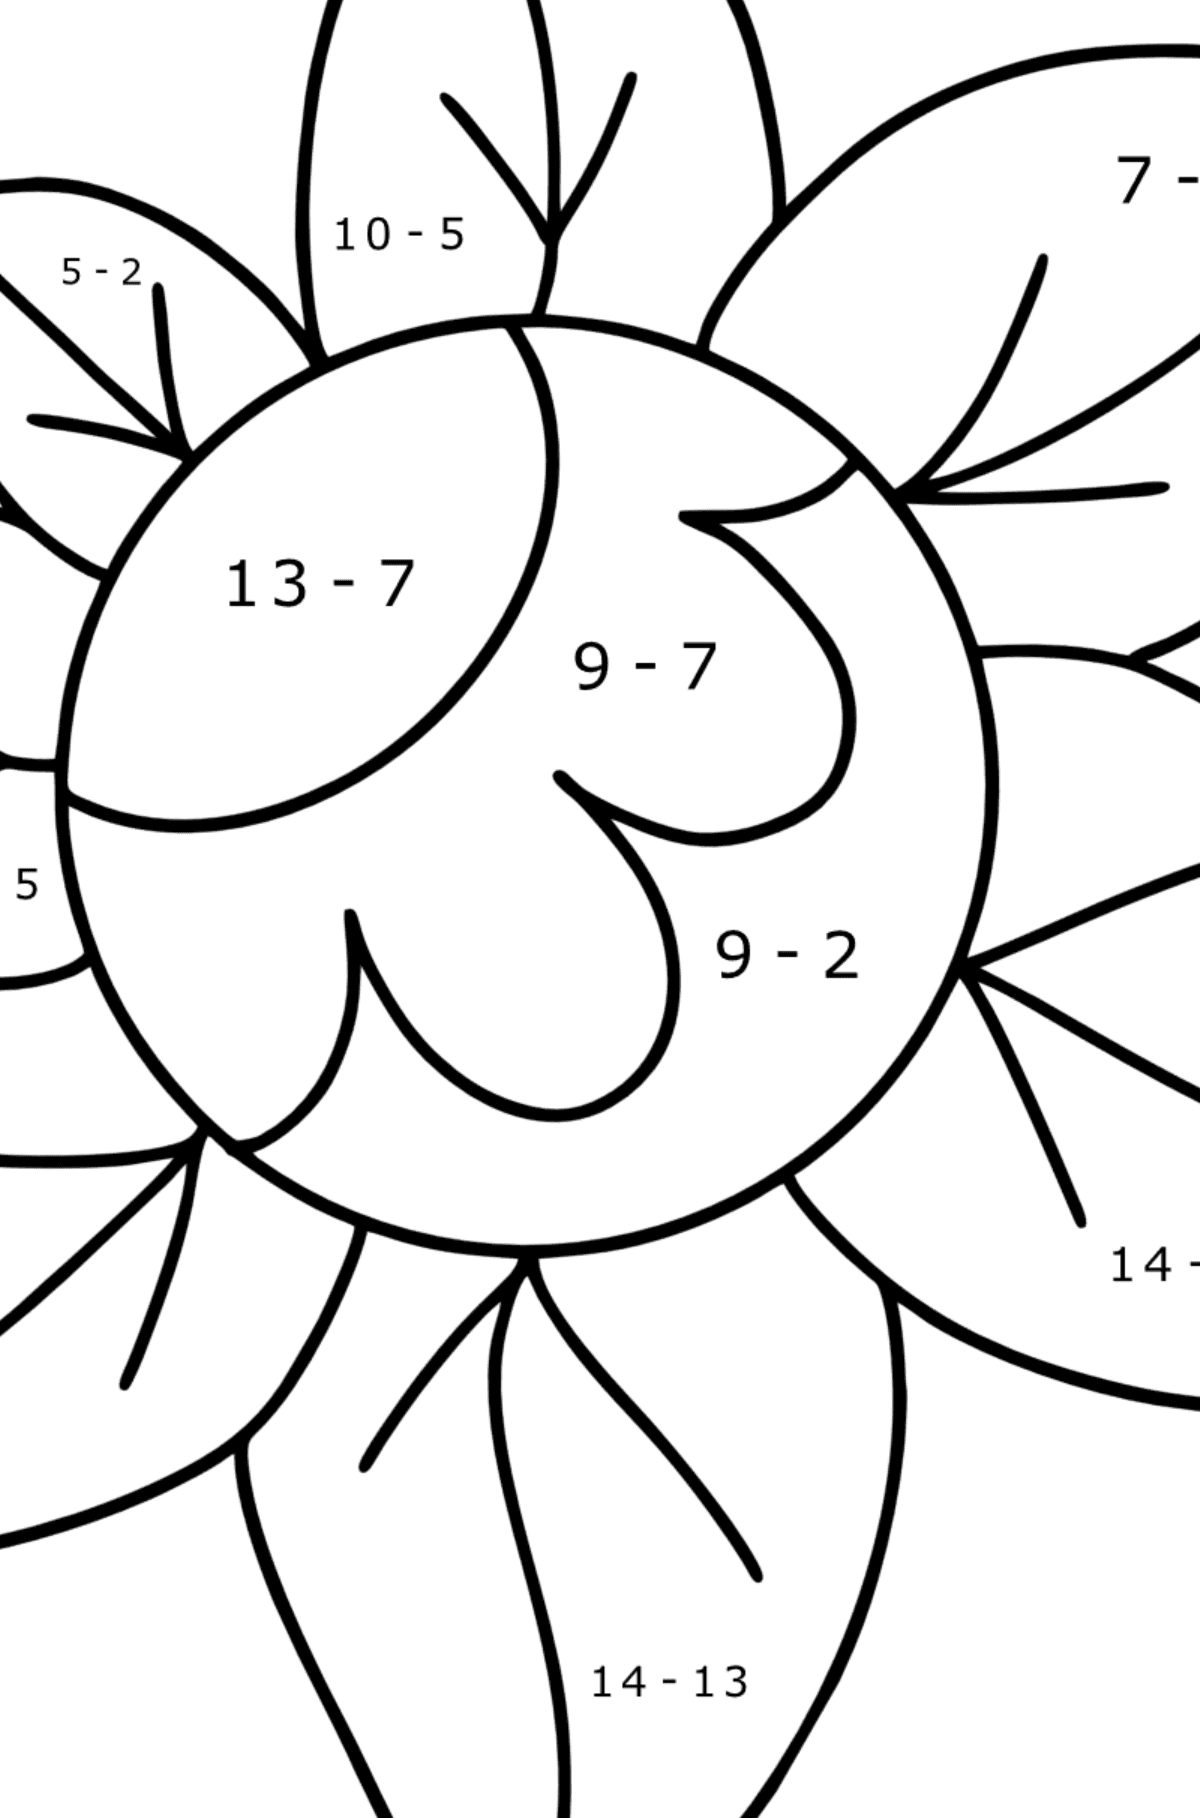 Zentangle Art flower coloring page - Math Coloring - Subtraction for Kids